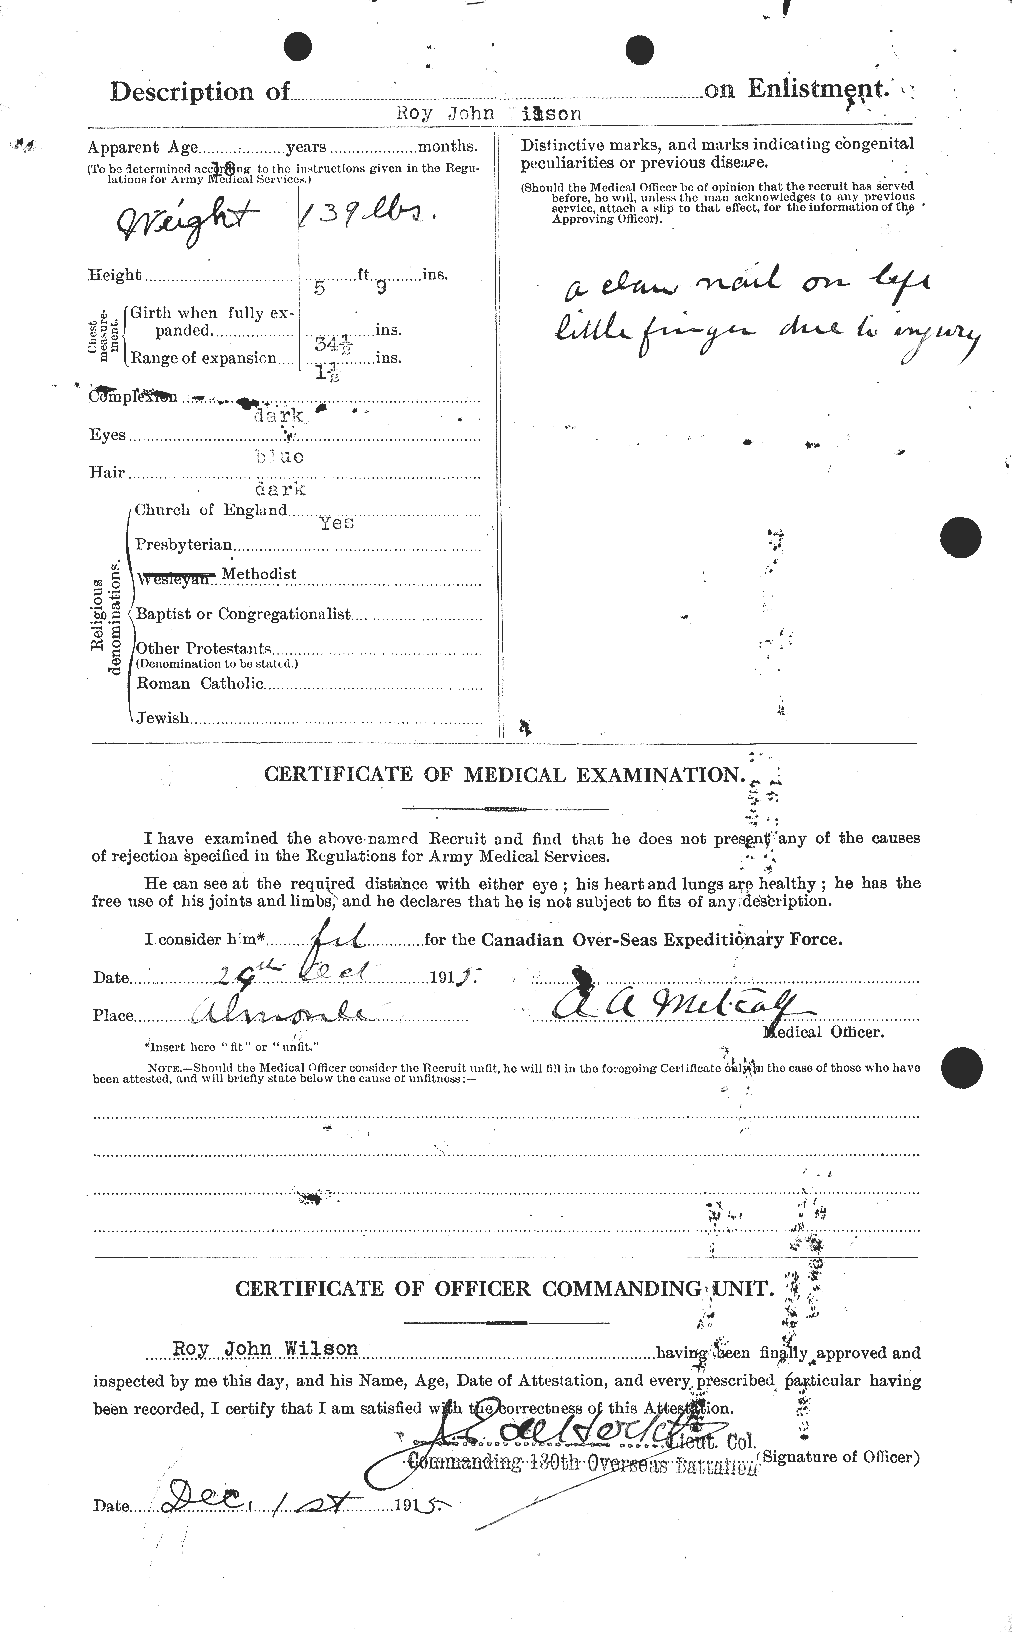 Personnel Records of the First World War - CEF 681061b